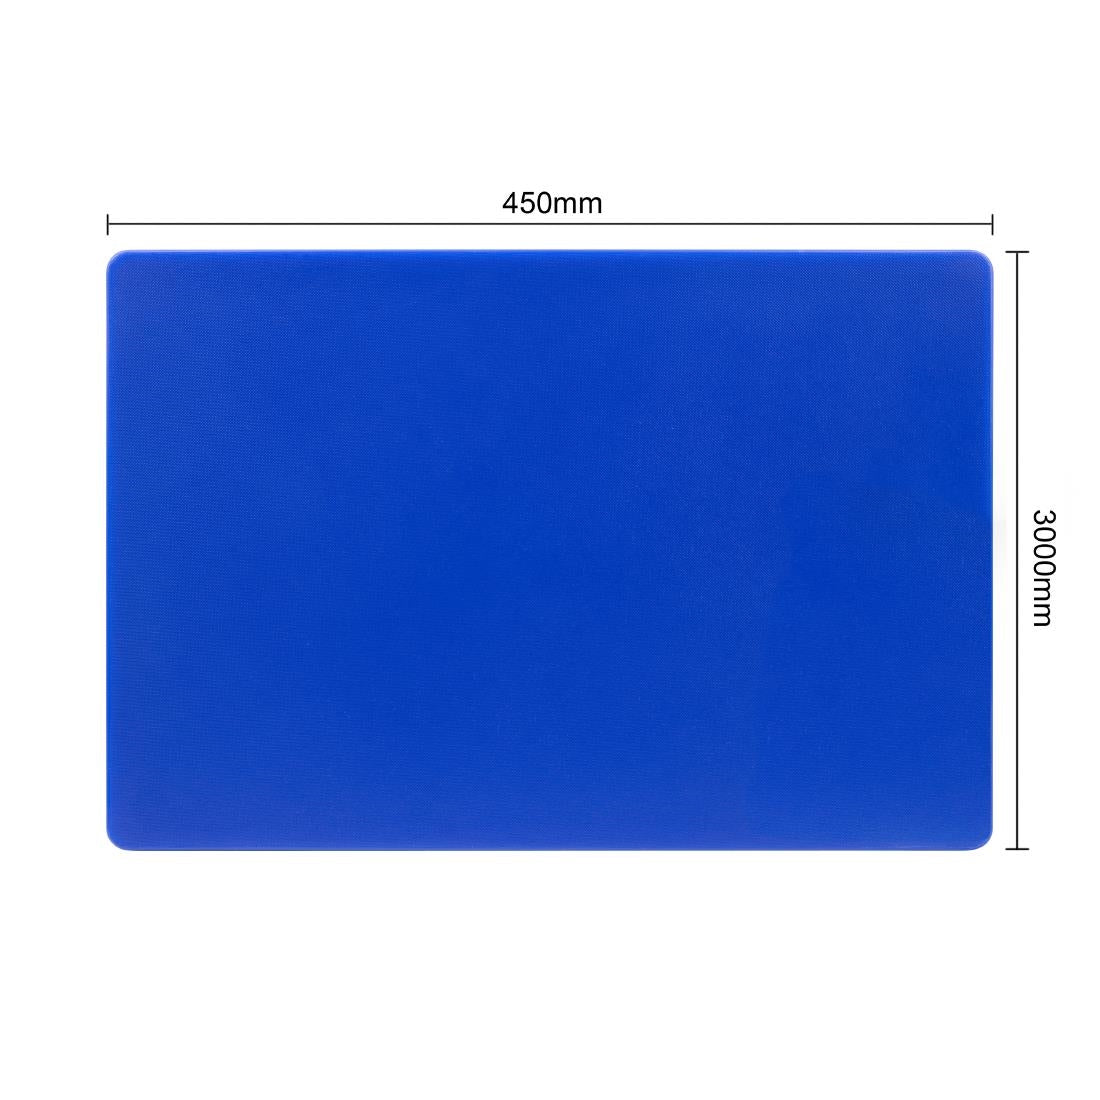 CH044 Hygiplas Low Density Chopping Boards Set with Rack (Set of 7 - 20mm High) JD Catering Equipment Solutions Ltd